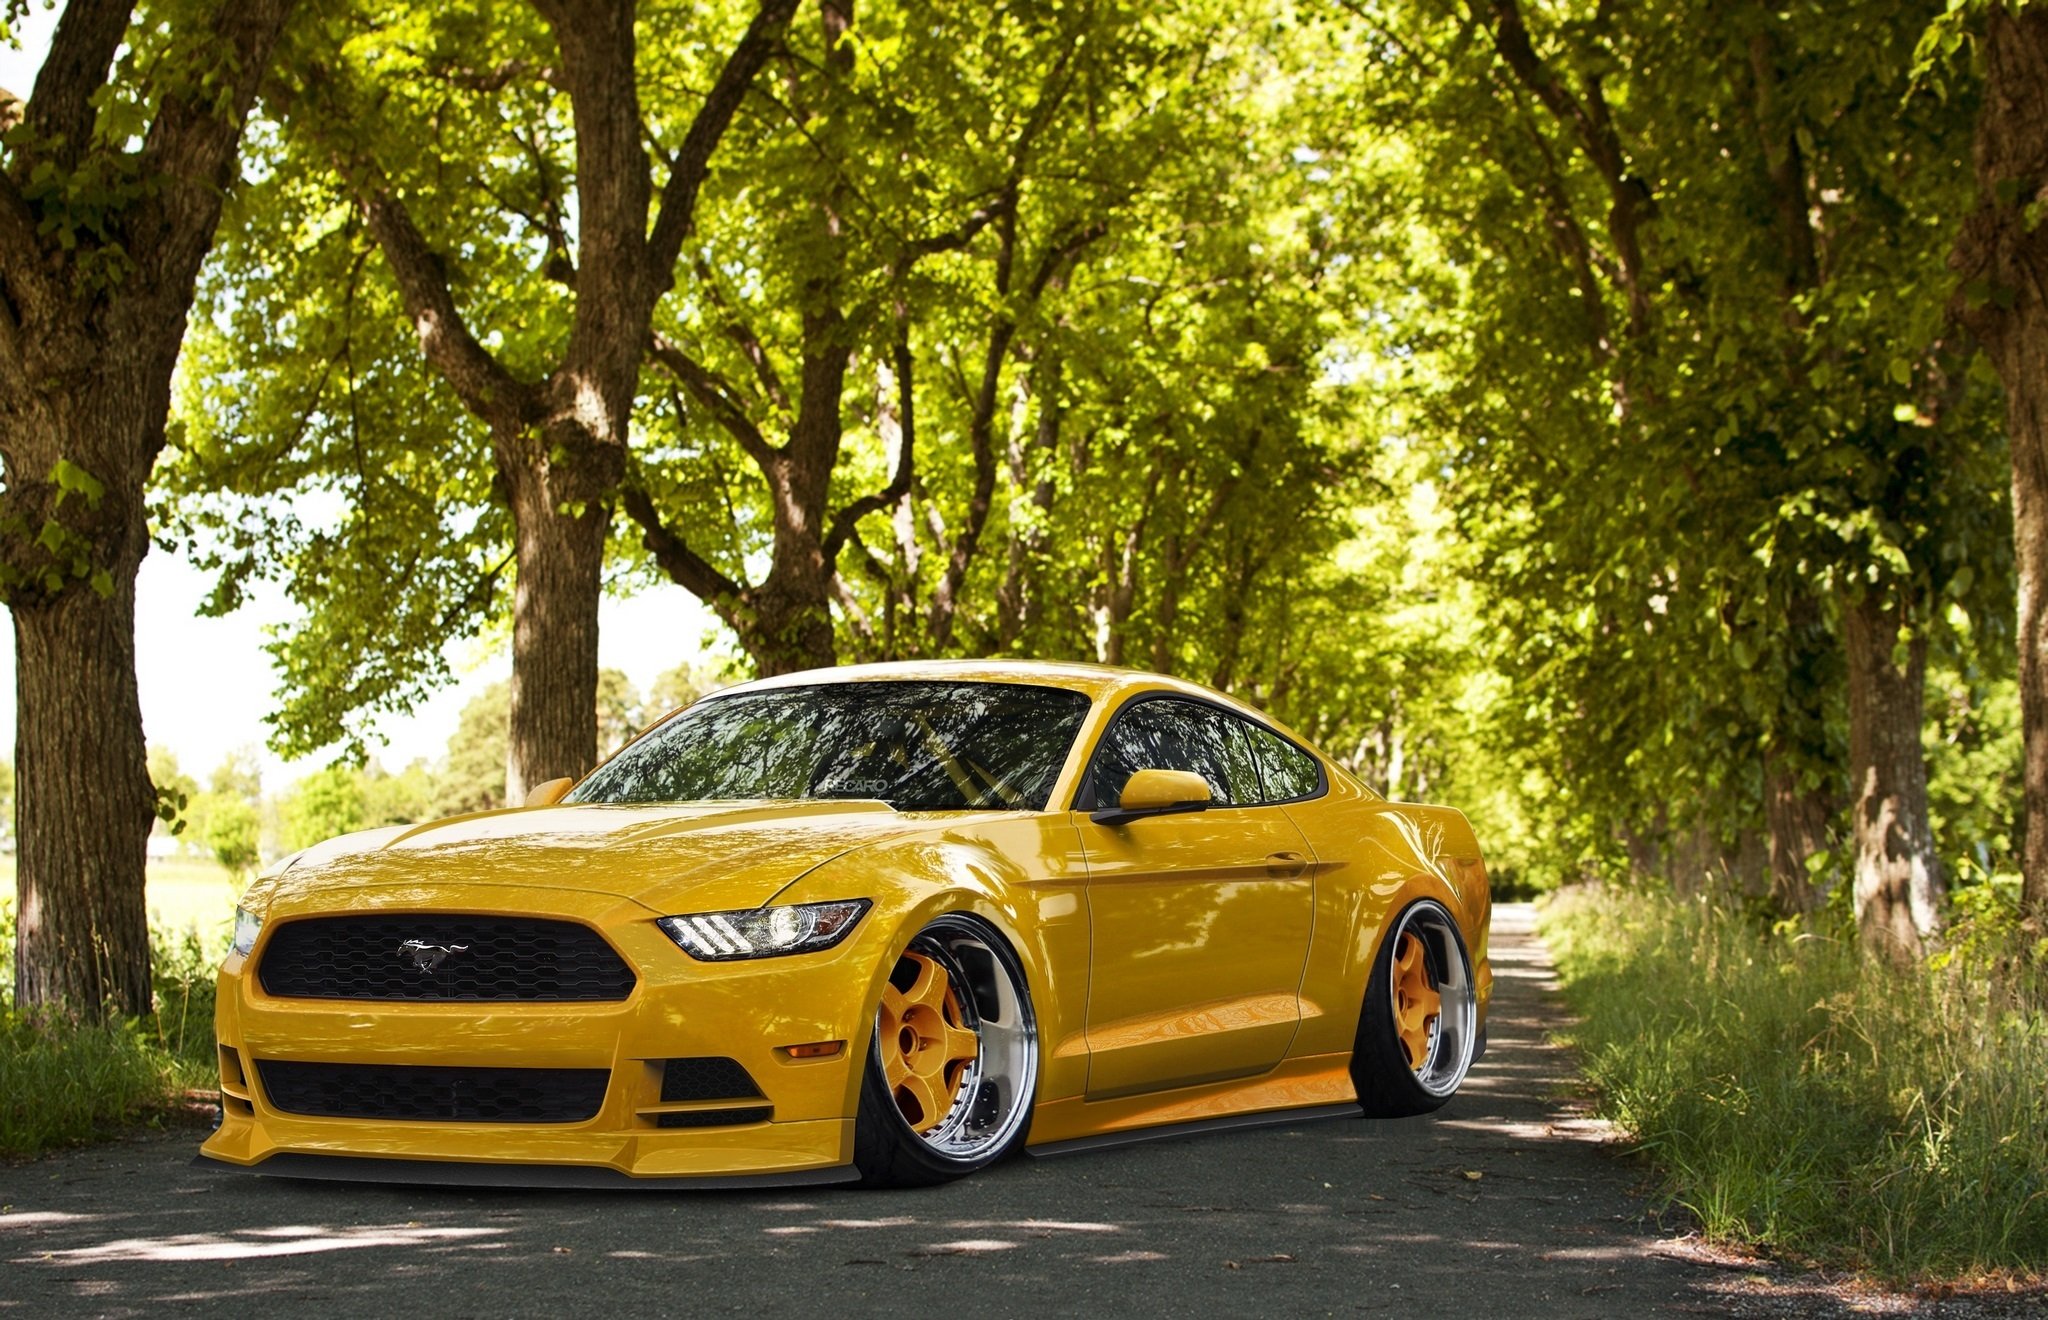 Stance Yellow Tuning Front Wheels Hot Rod Rods Muscle Wallpaper